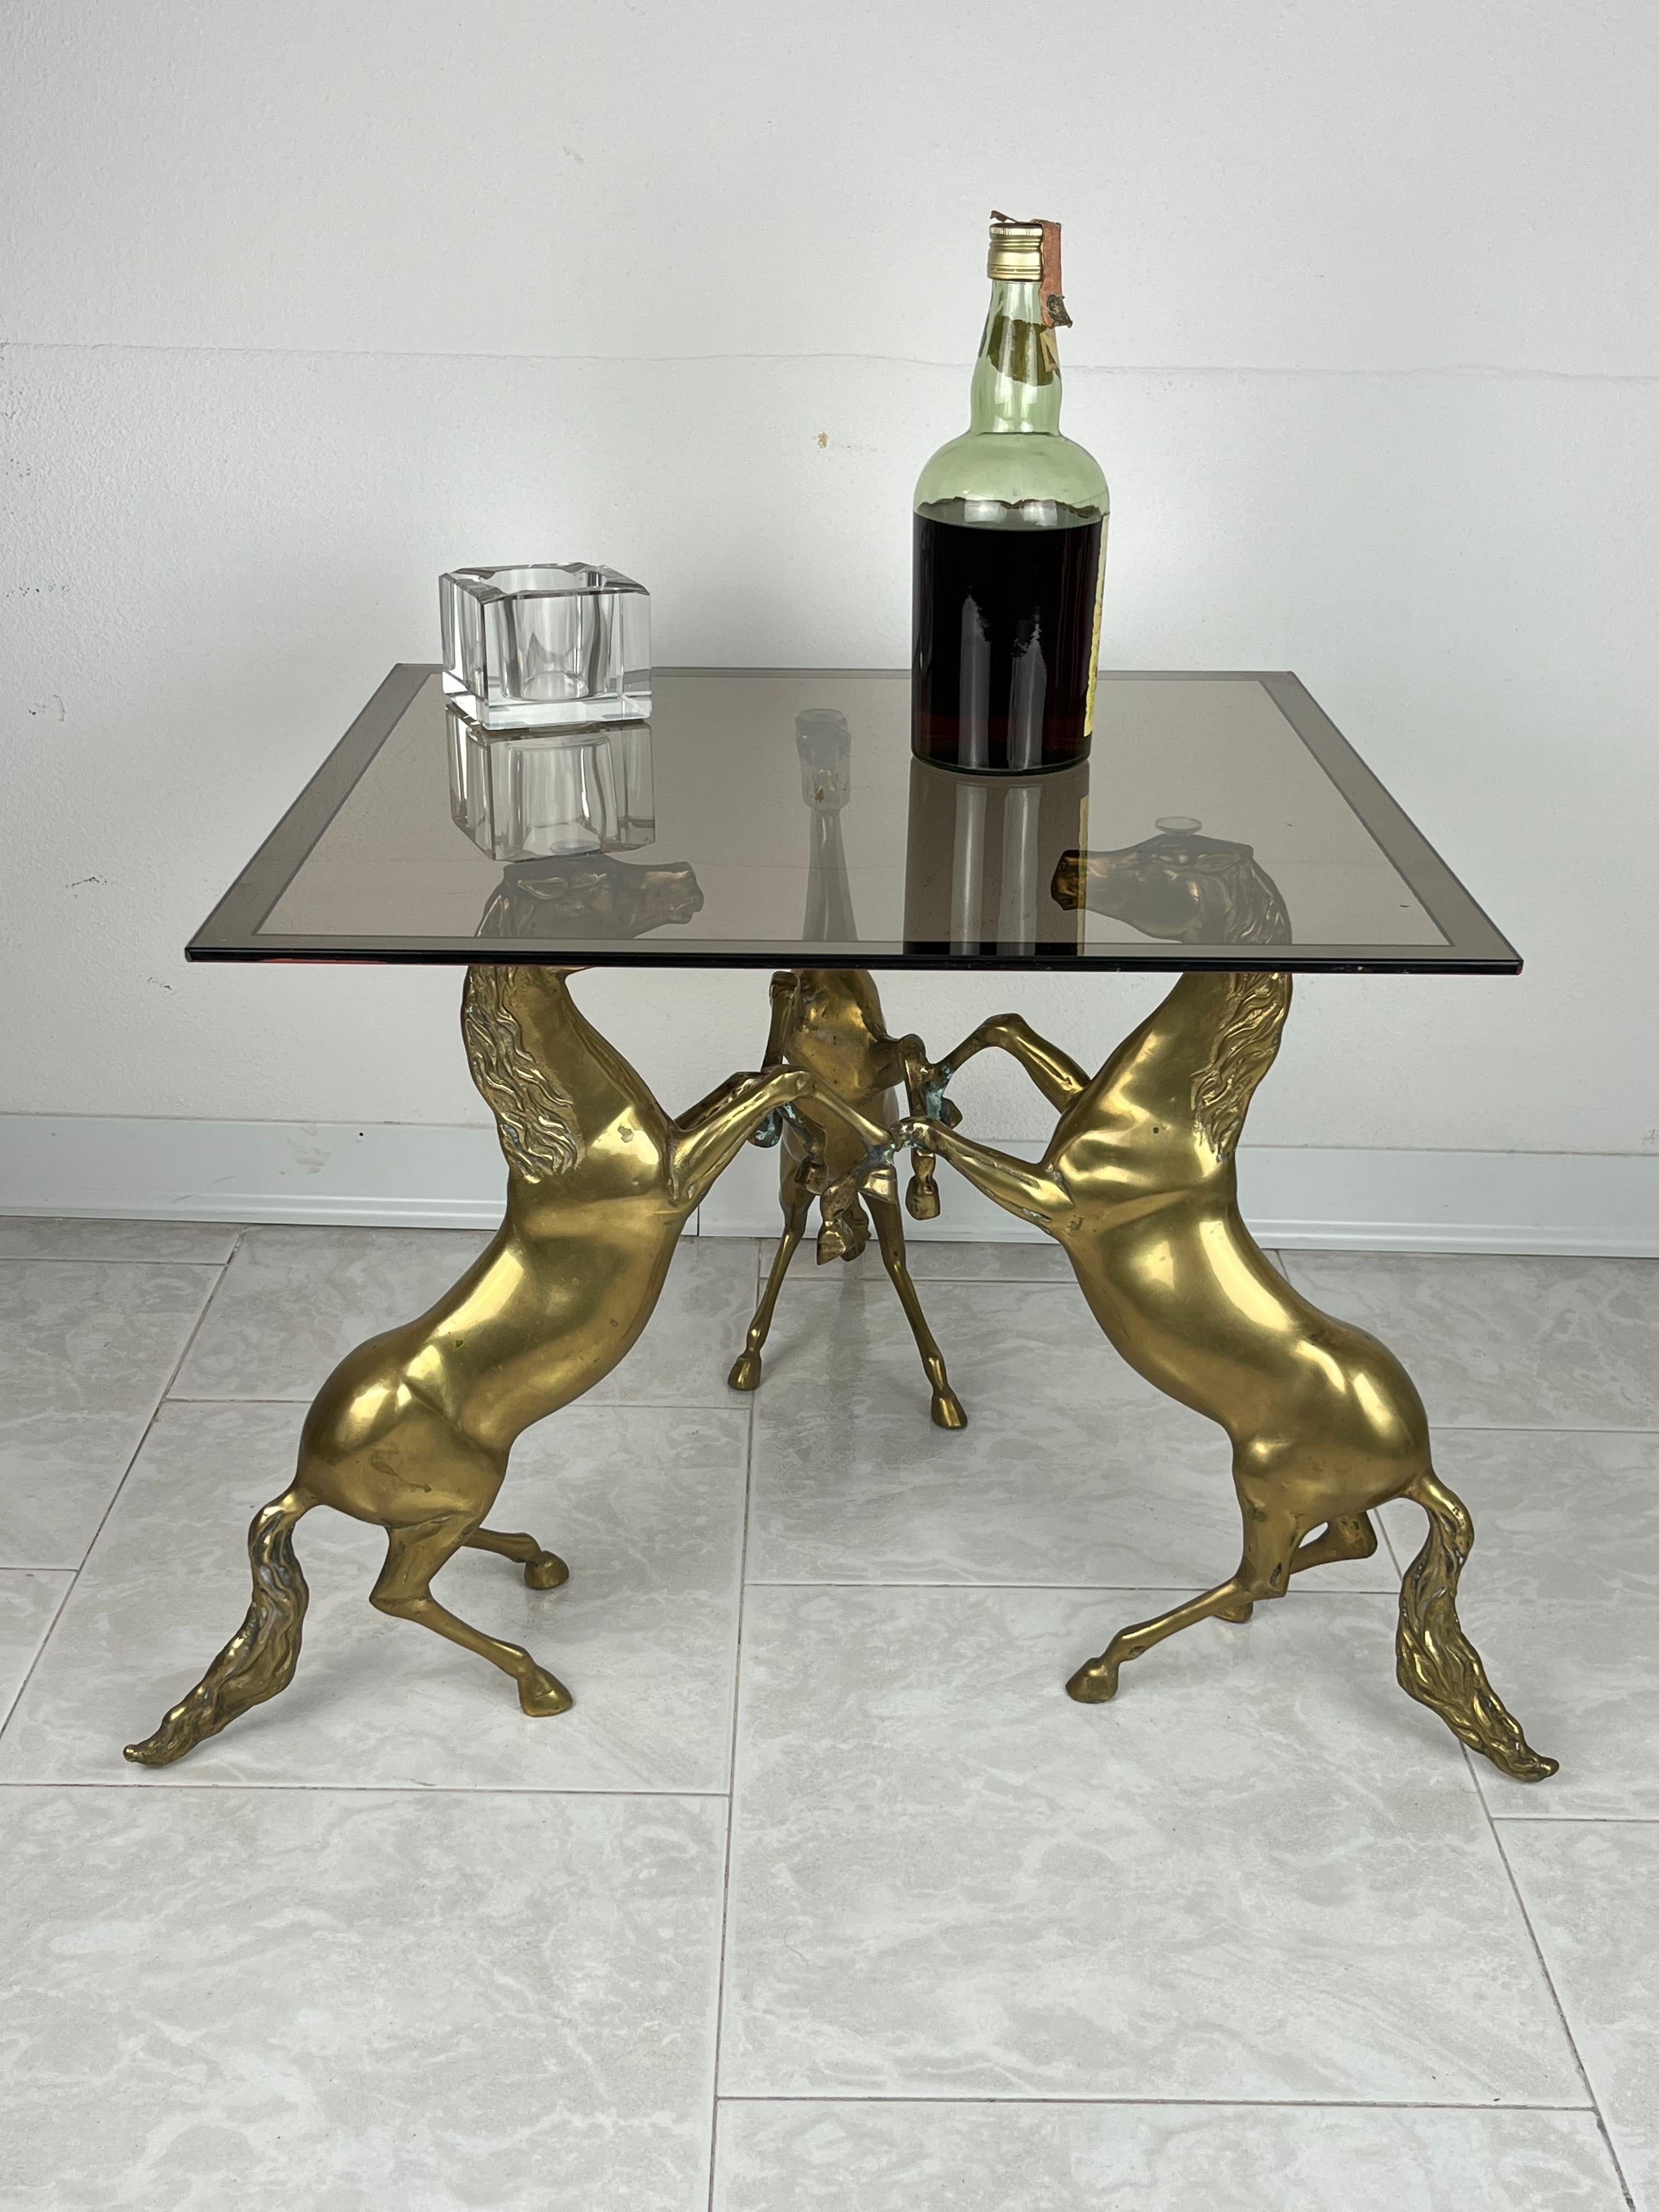 Coffee table in brass and smoked glass top, Italy, 1960s
Found in a noble apartment. Intact and in good condition. Small signs of aging.